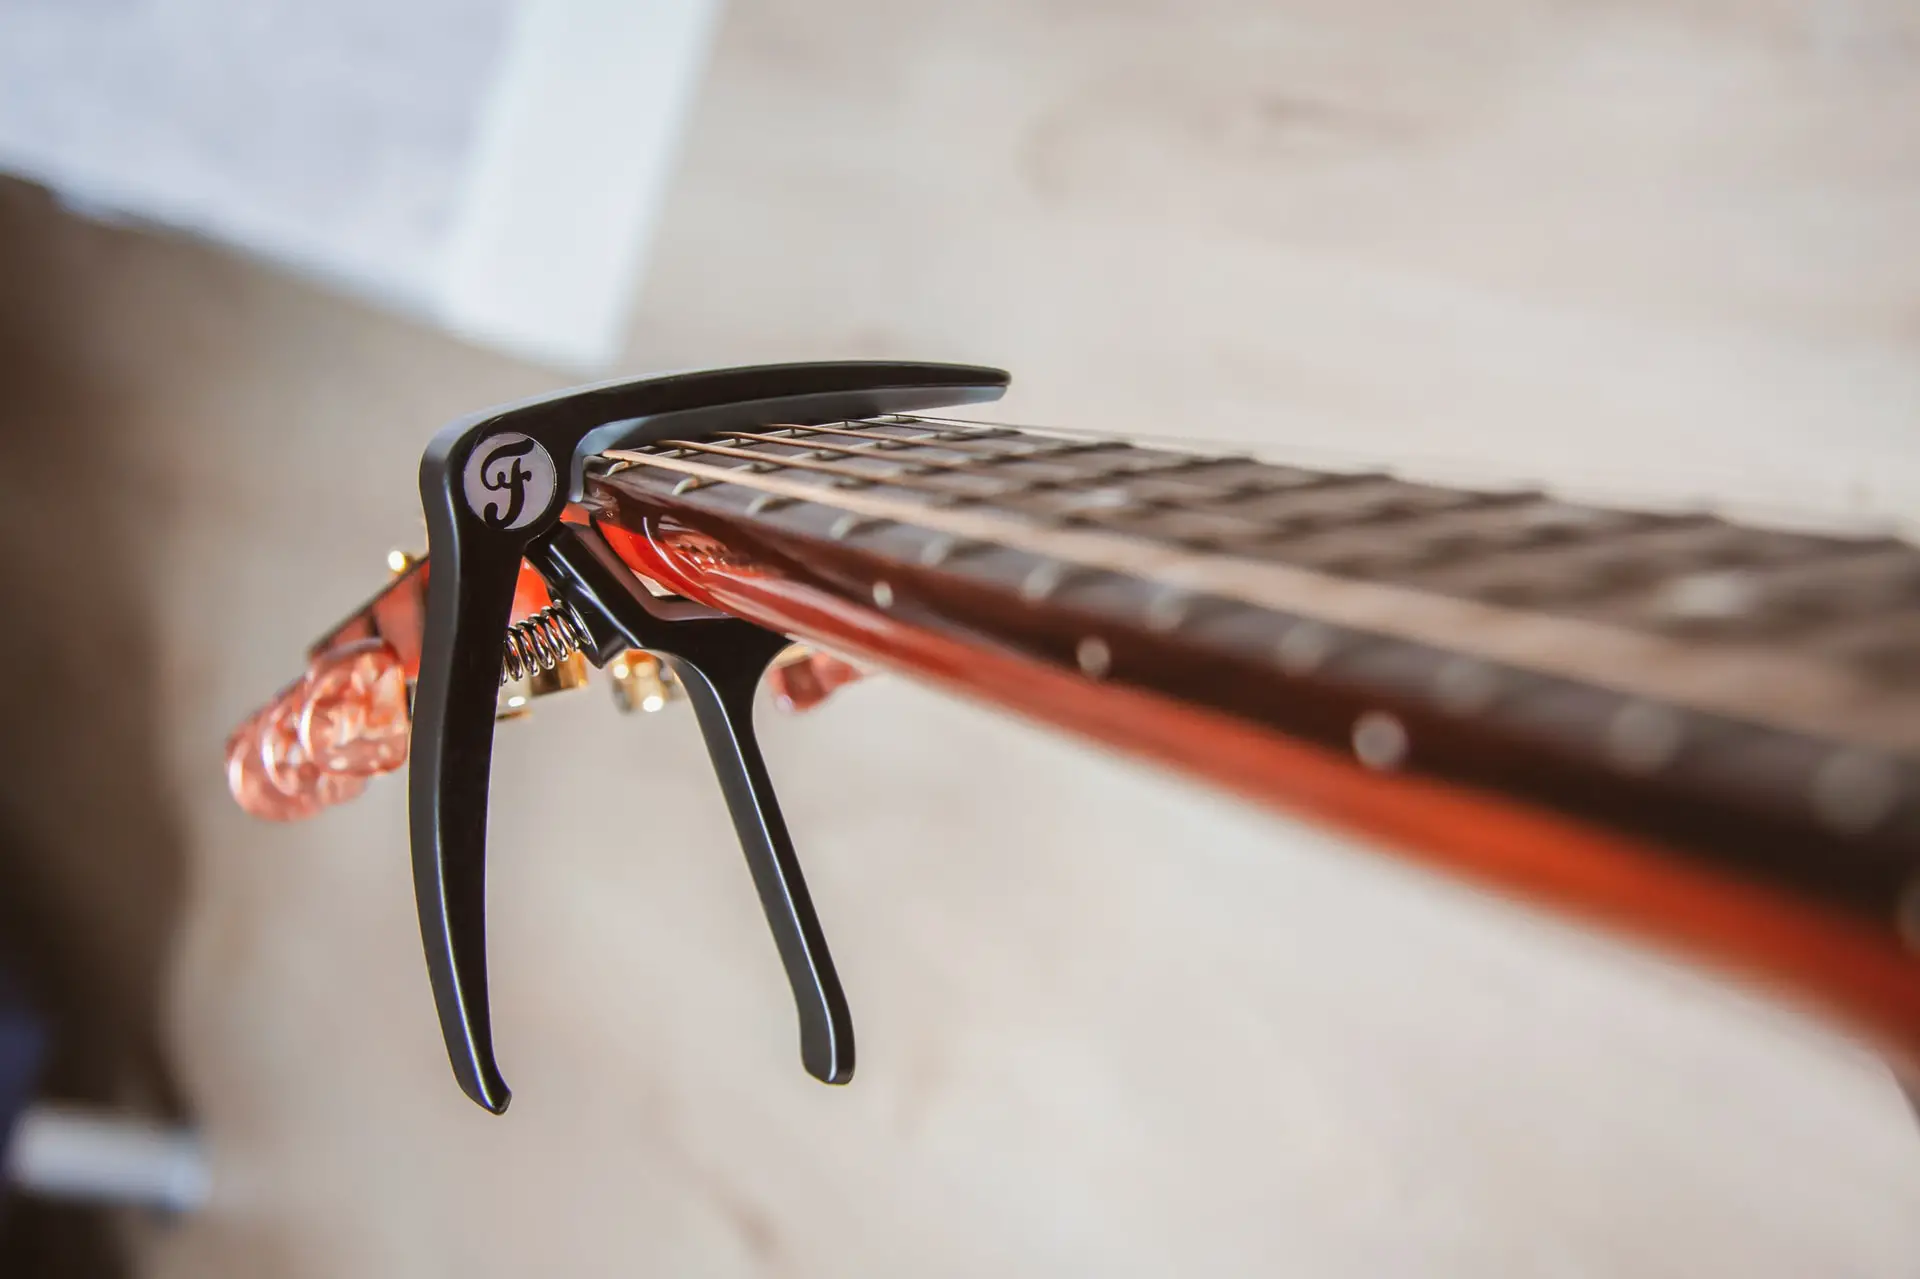 Where To Keep Guitar Capo When Not In Use: A Quick Guide